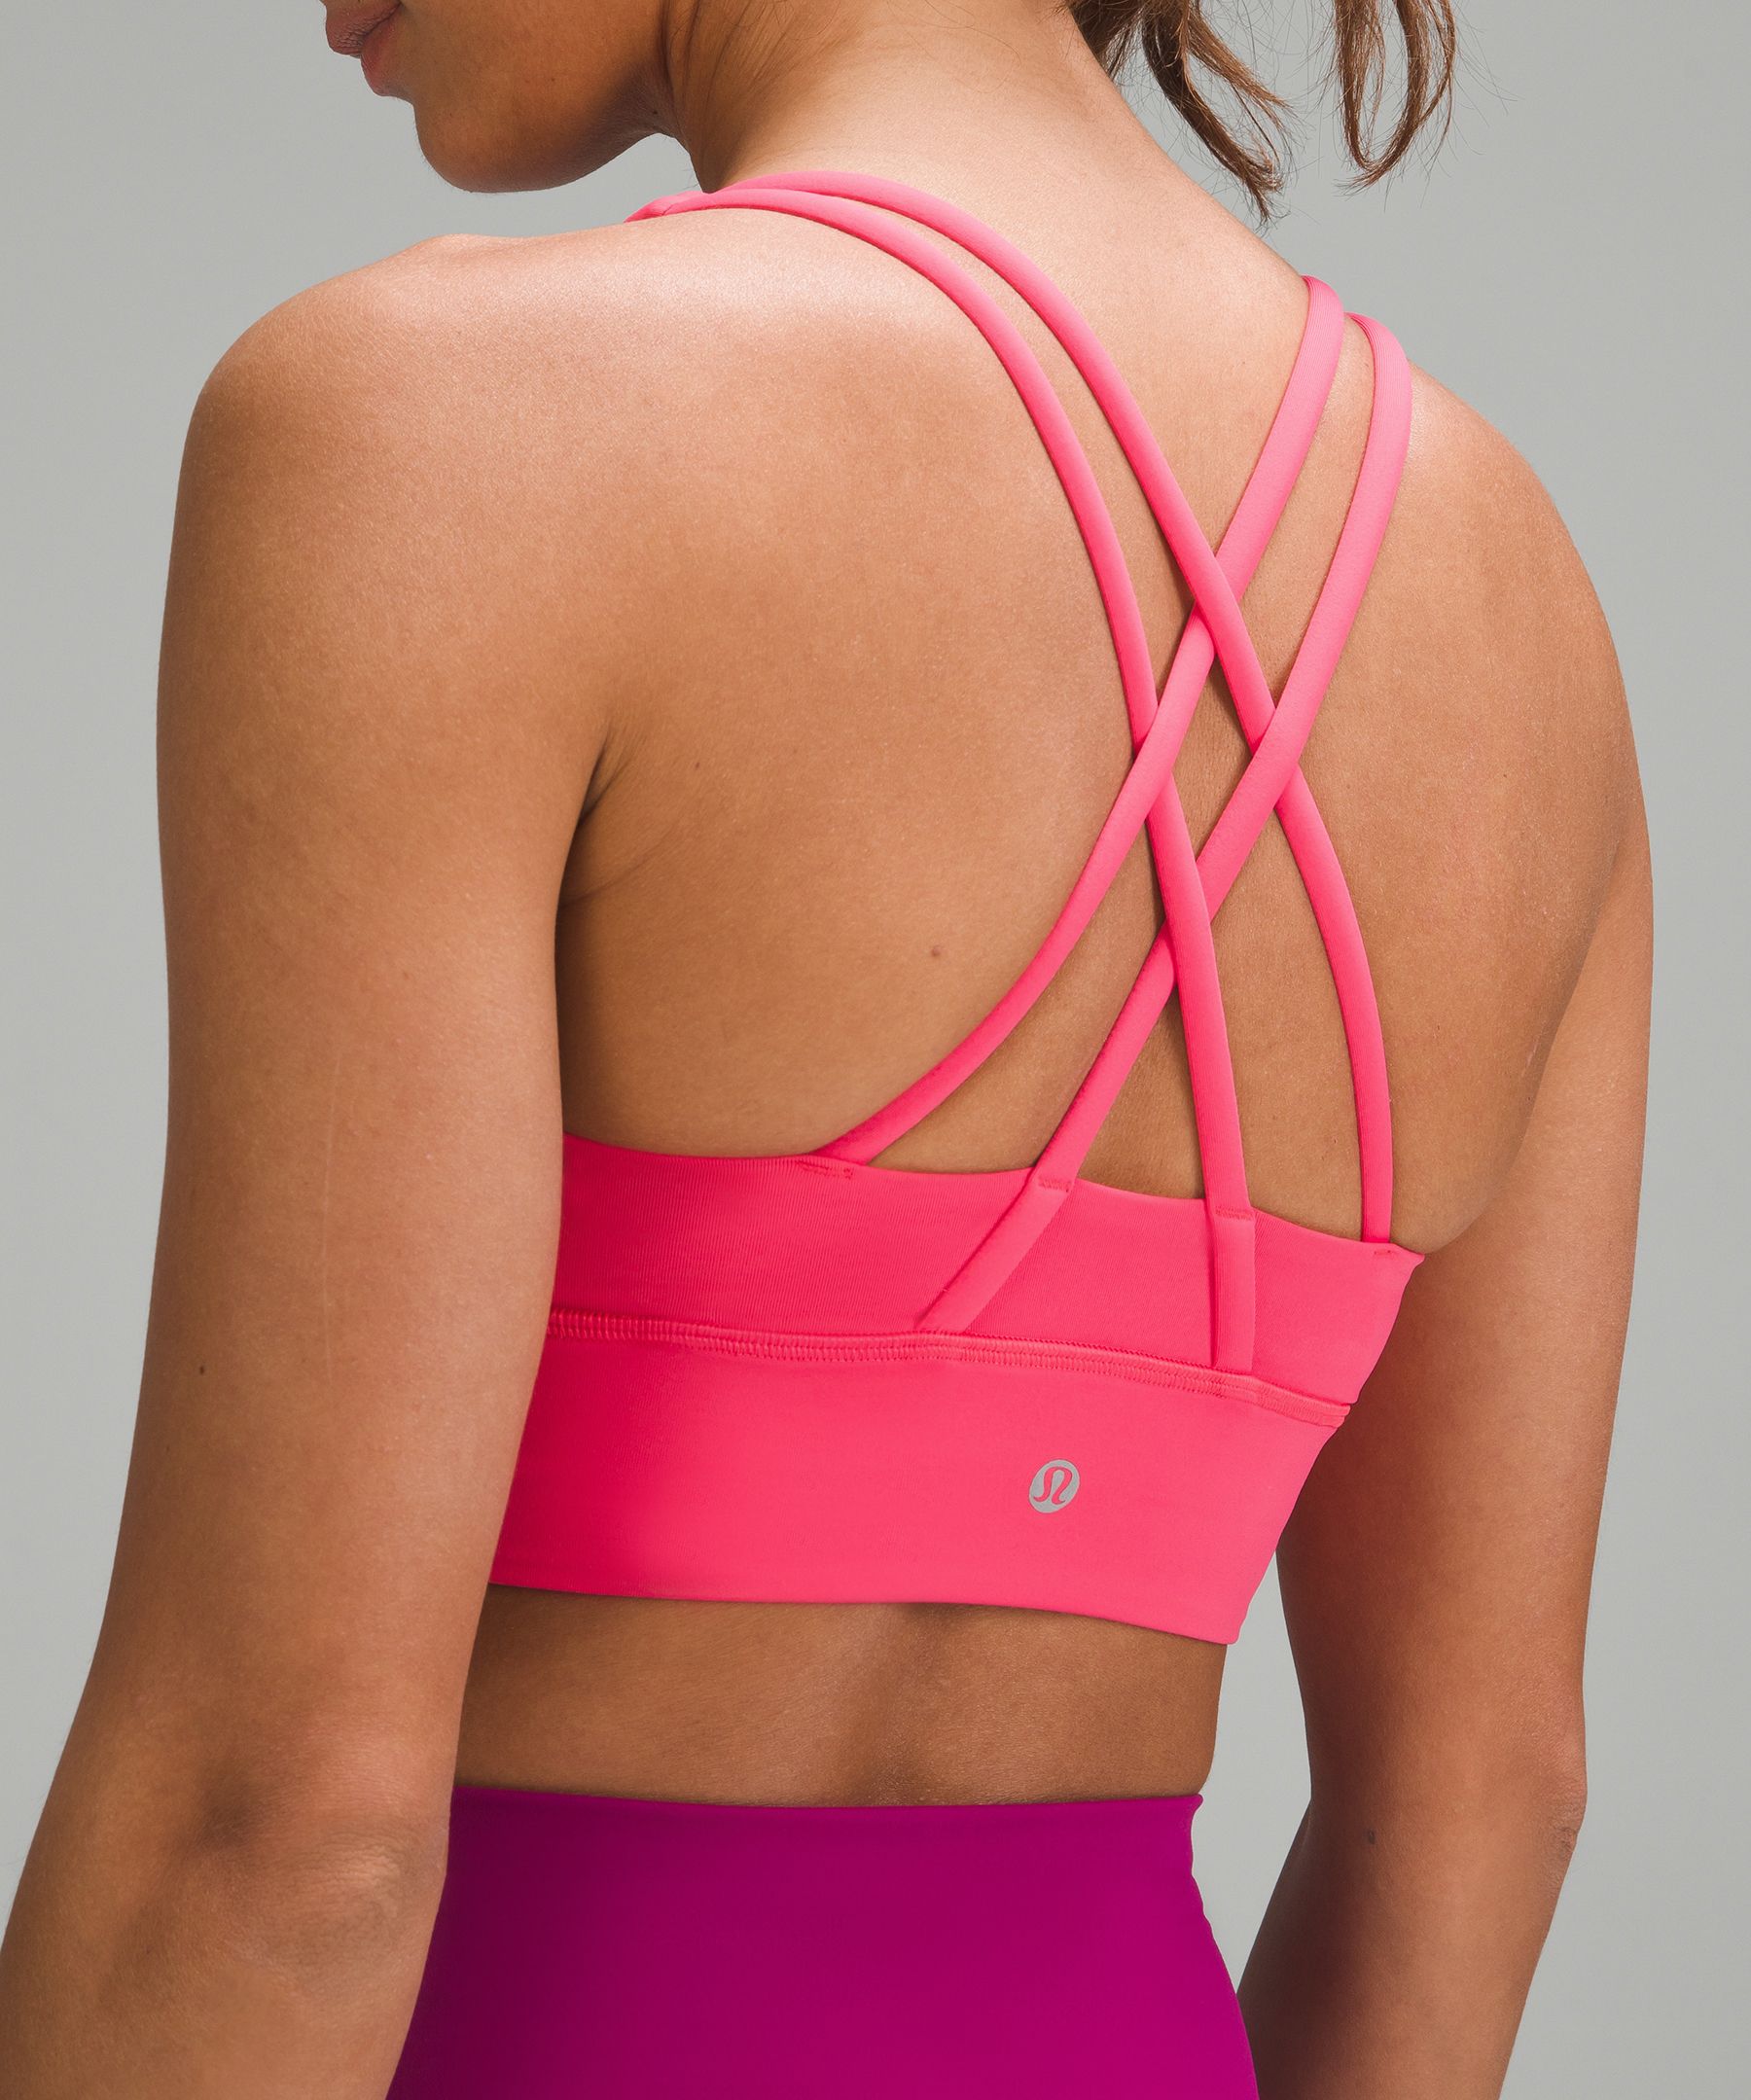 Lululemon ENERGY BRA 6 💕 Pink Highlight 💕 NEON NWT Sonic Sports Crop Sold  Out